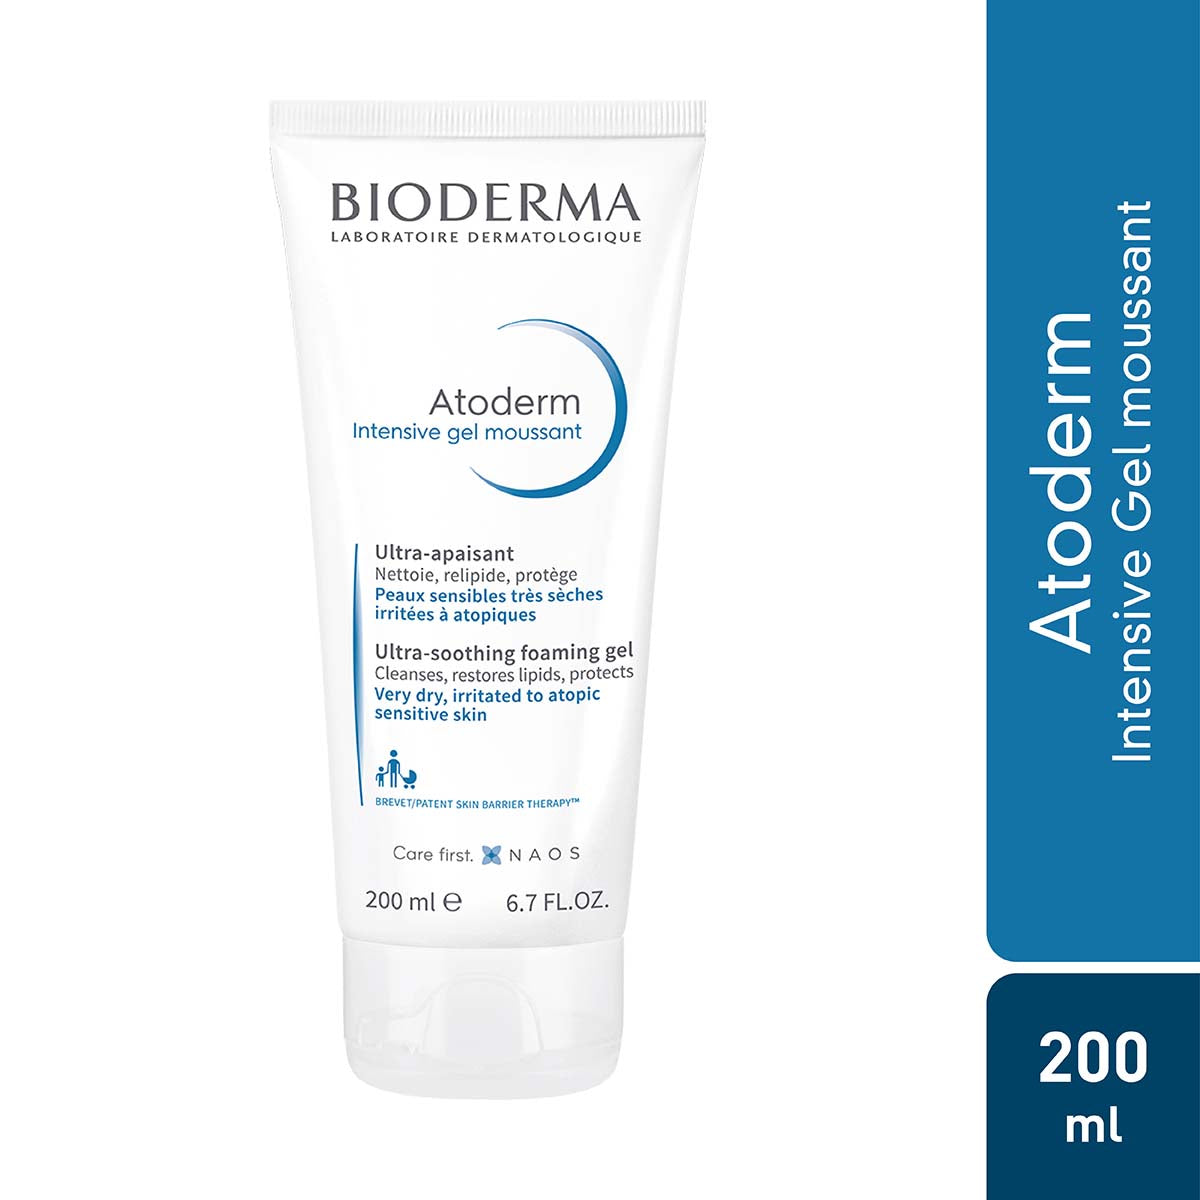 Buy  Bioderma Atoderm Intensive Gel Moussant 200ml | Hydrating Gel Cleanser - at Best Price Online in Pakistan